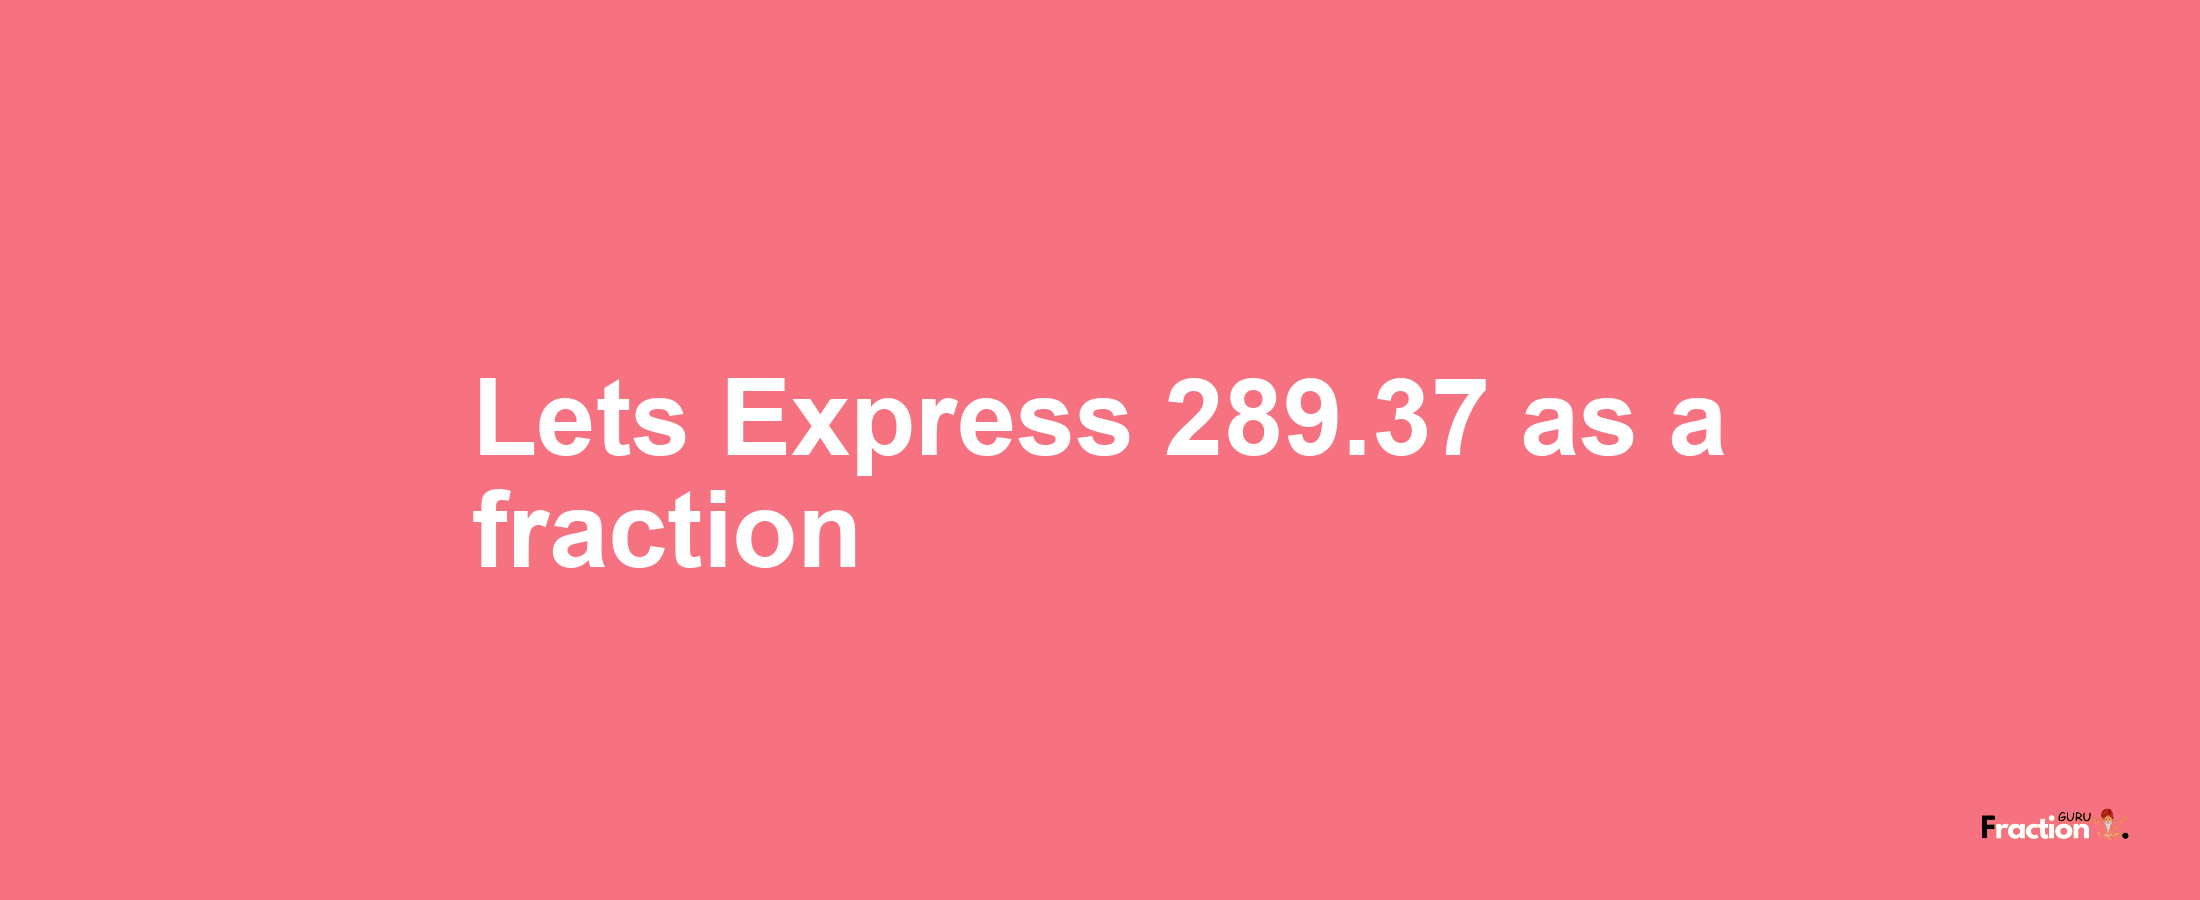 Lets Express 289.37 as afraction